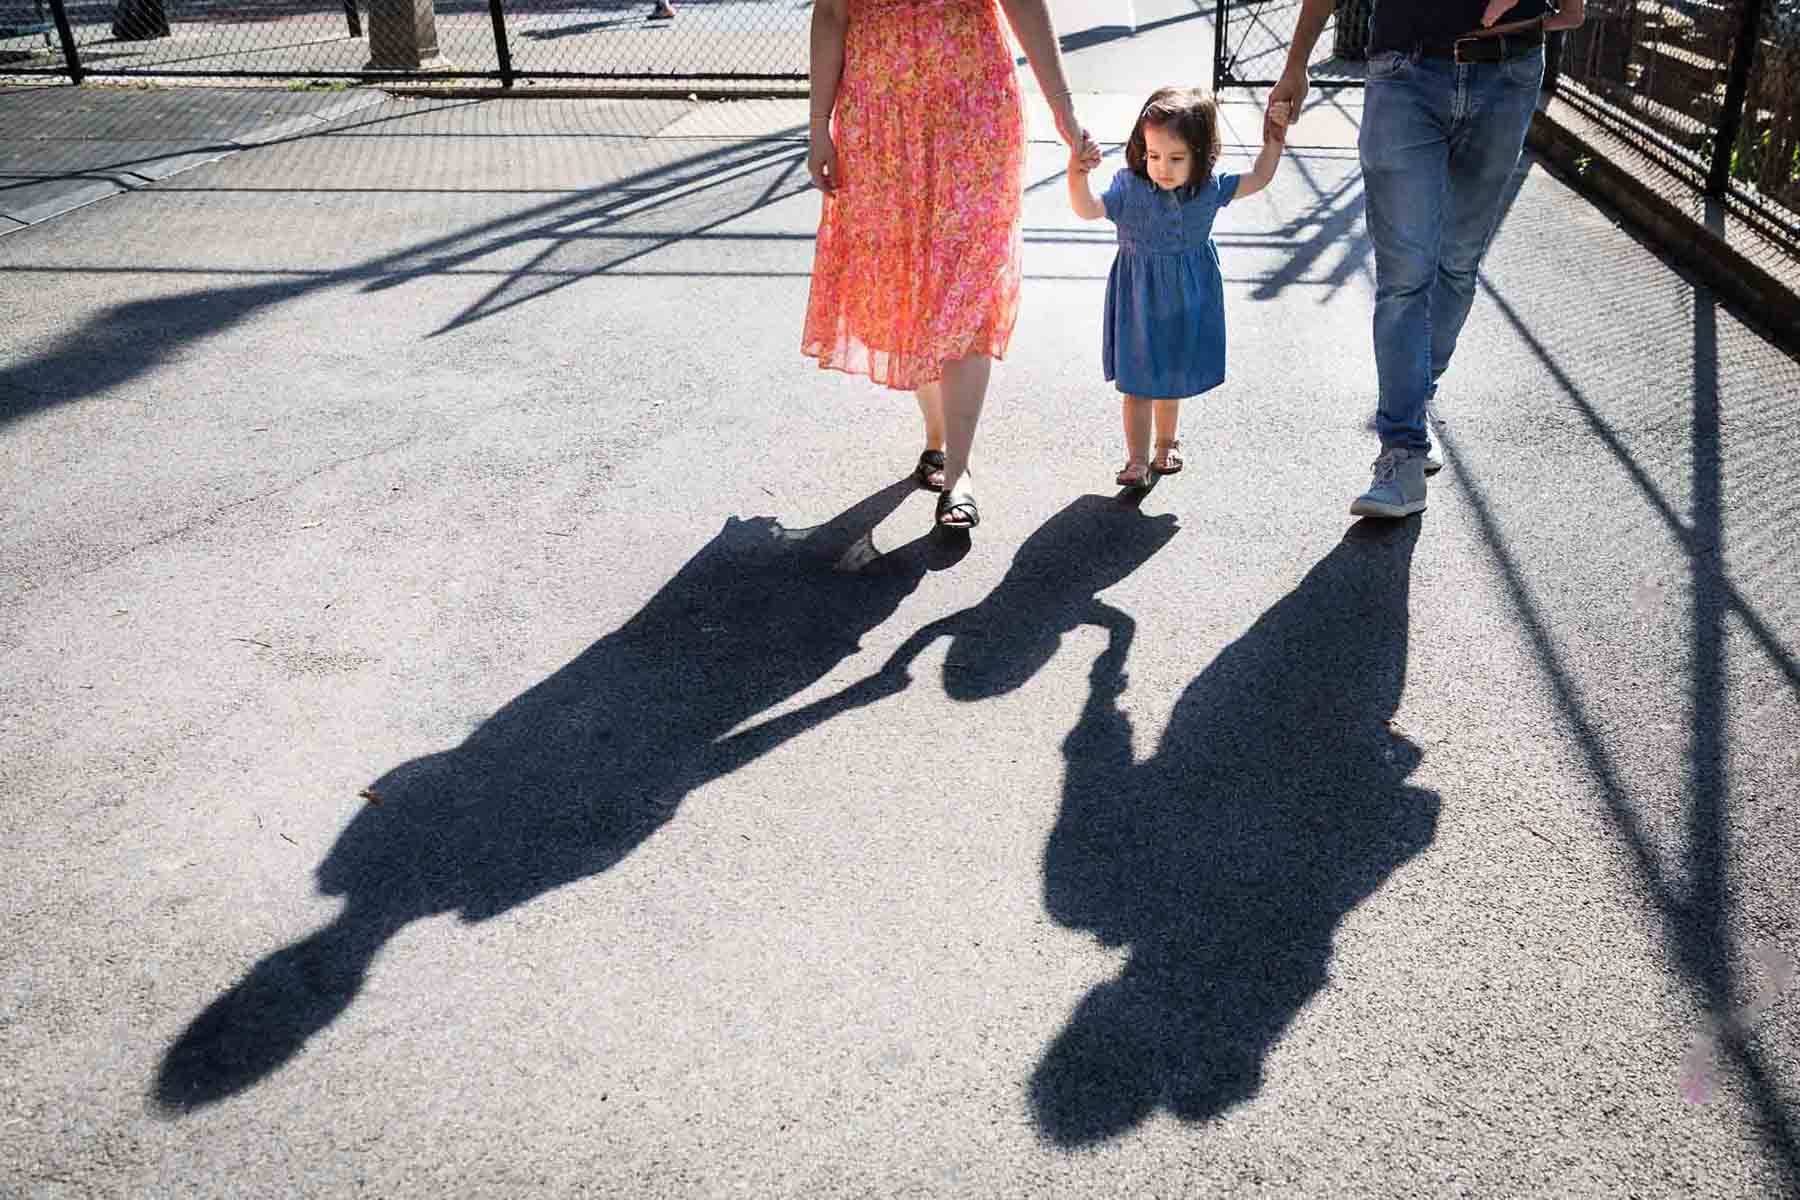 Shadow of little girl in blue dress holding parents's hands on playground